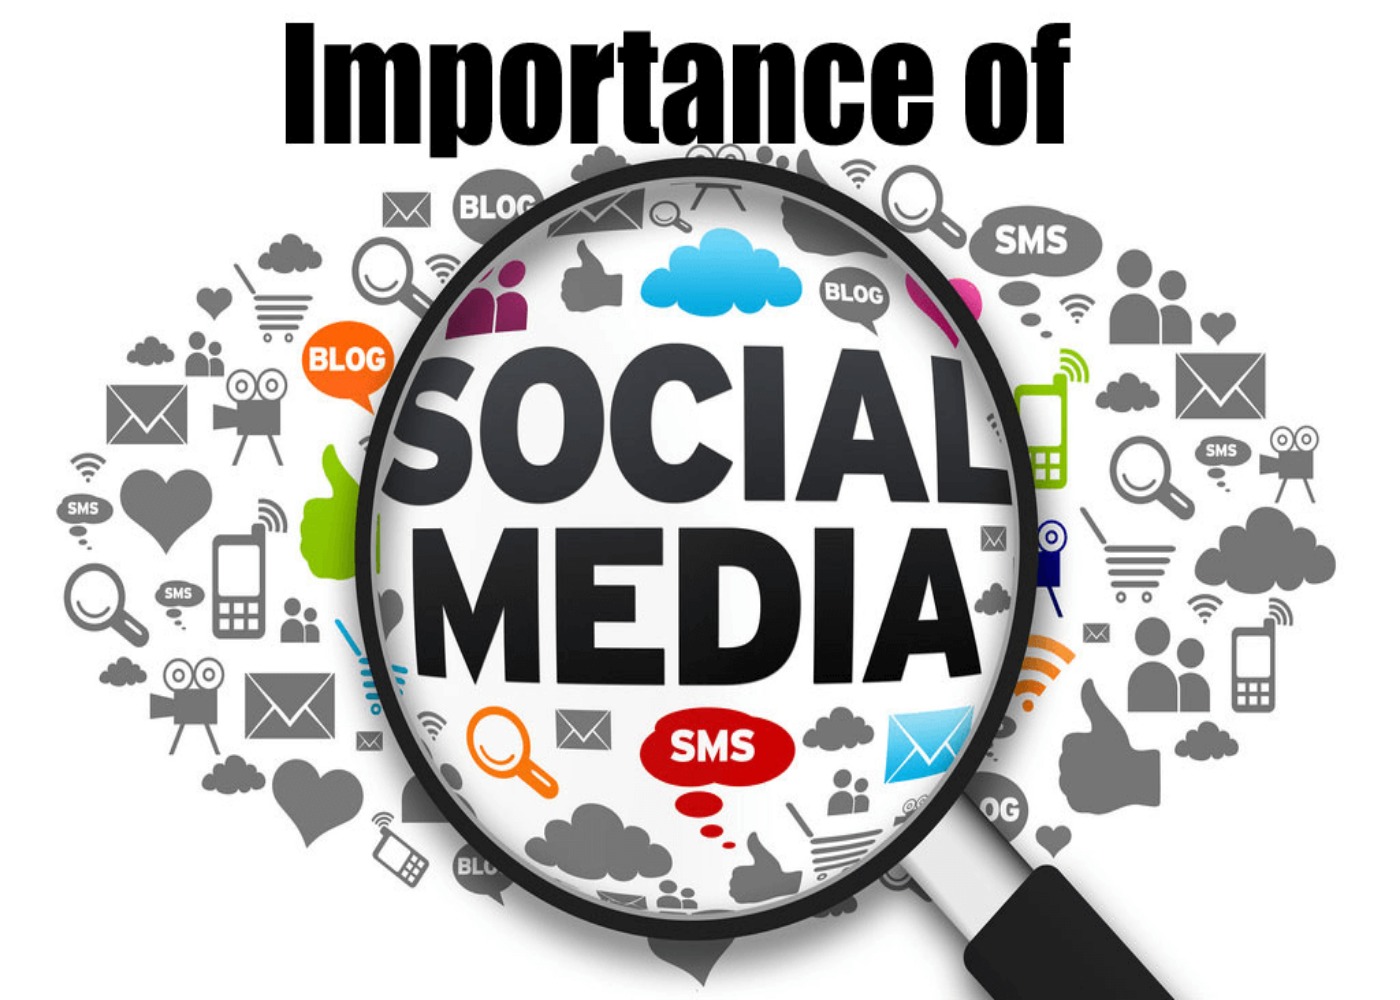 Why is social media important? 